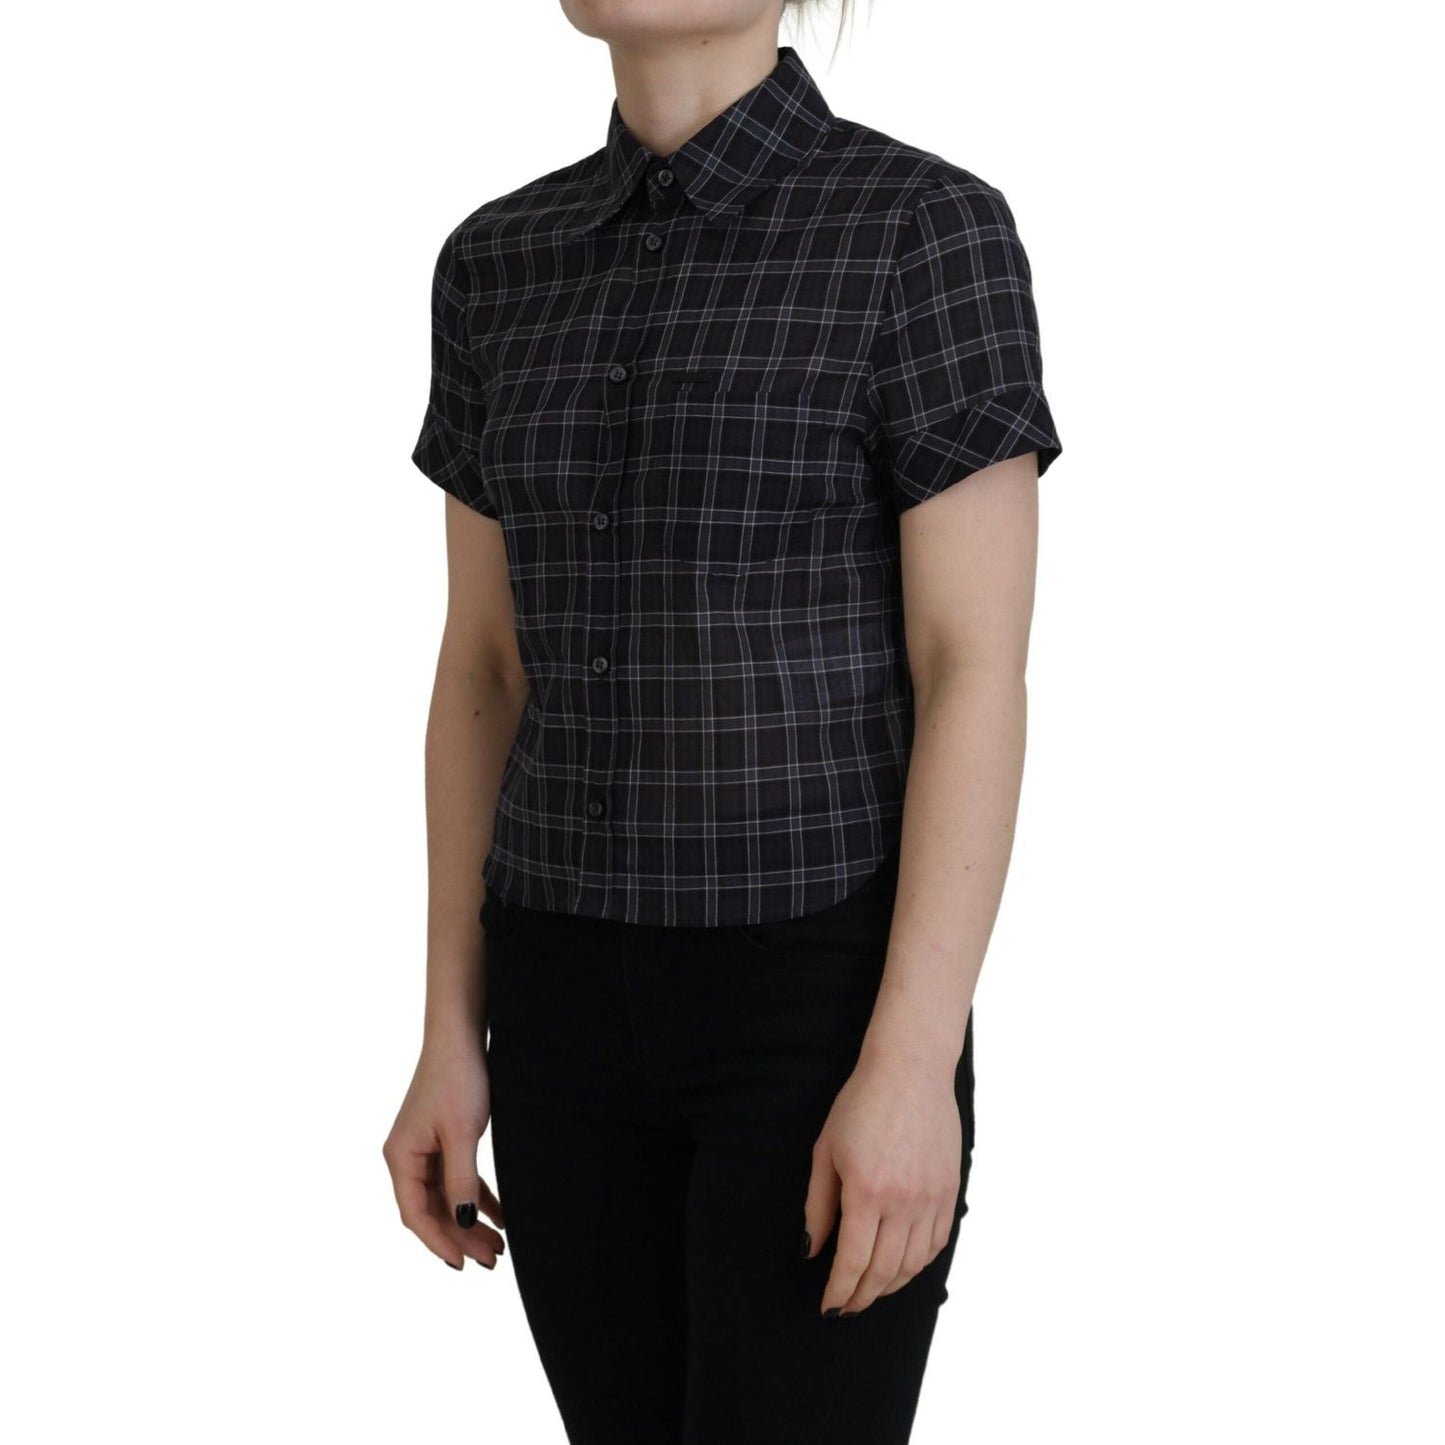 Dsquared² Black Checkered Collared Button Short Sleeves Top black-checkered-collared-button-short-sleeves-top